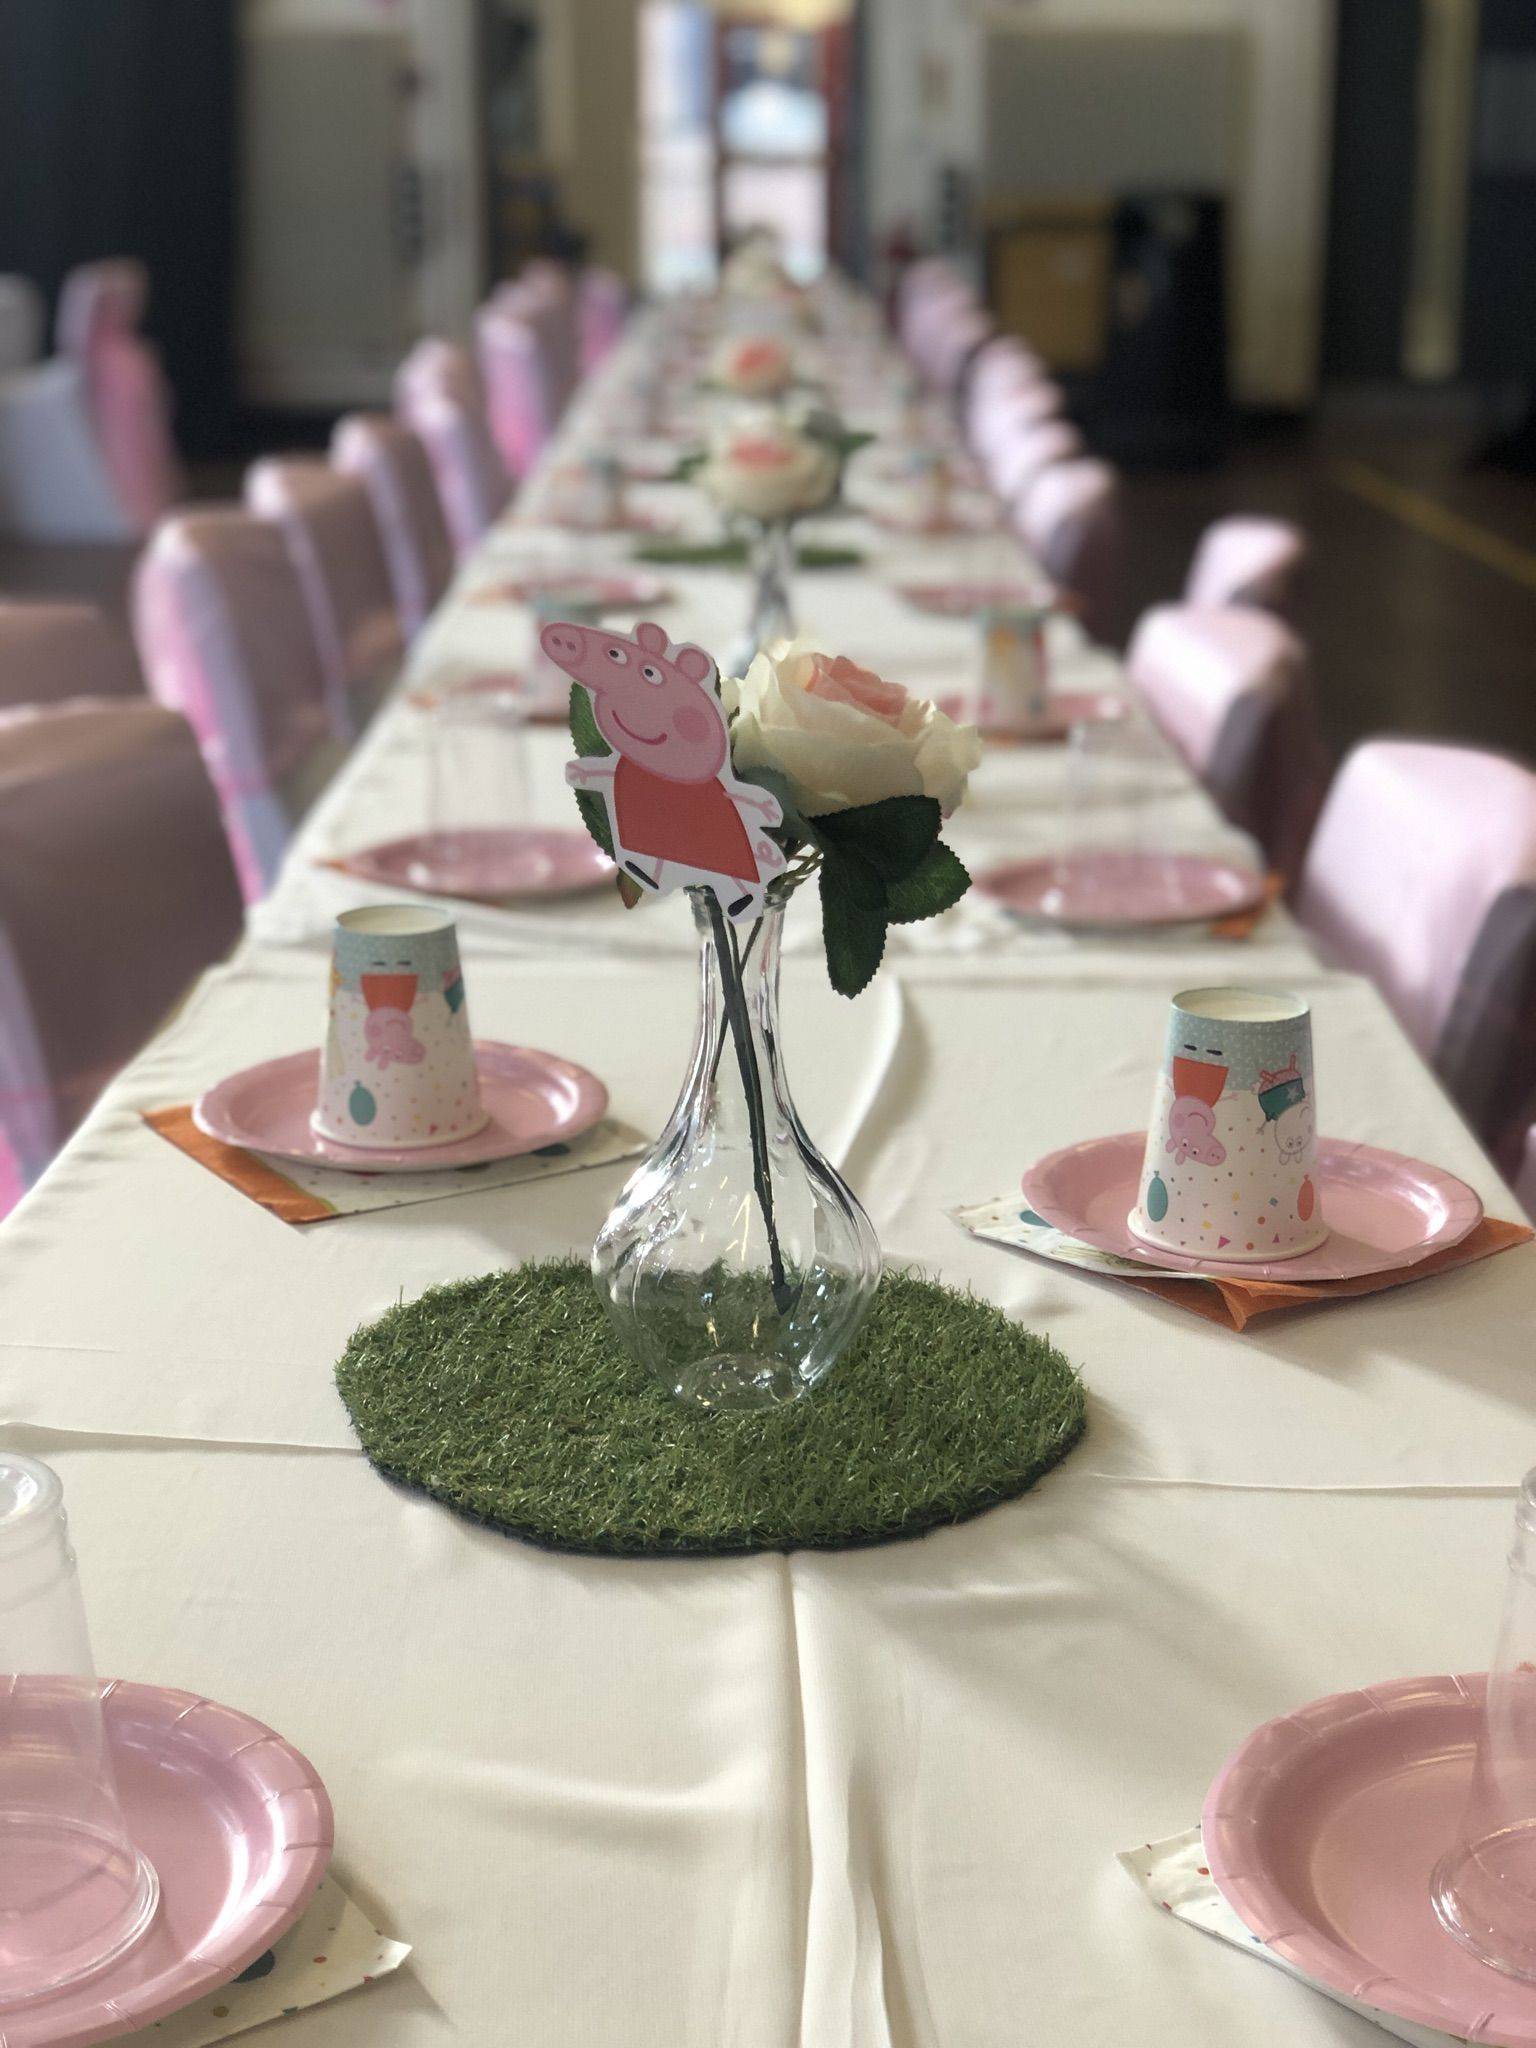 a long table is set with pink plates and pink napkins.